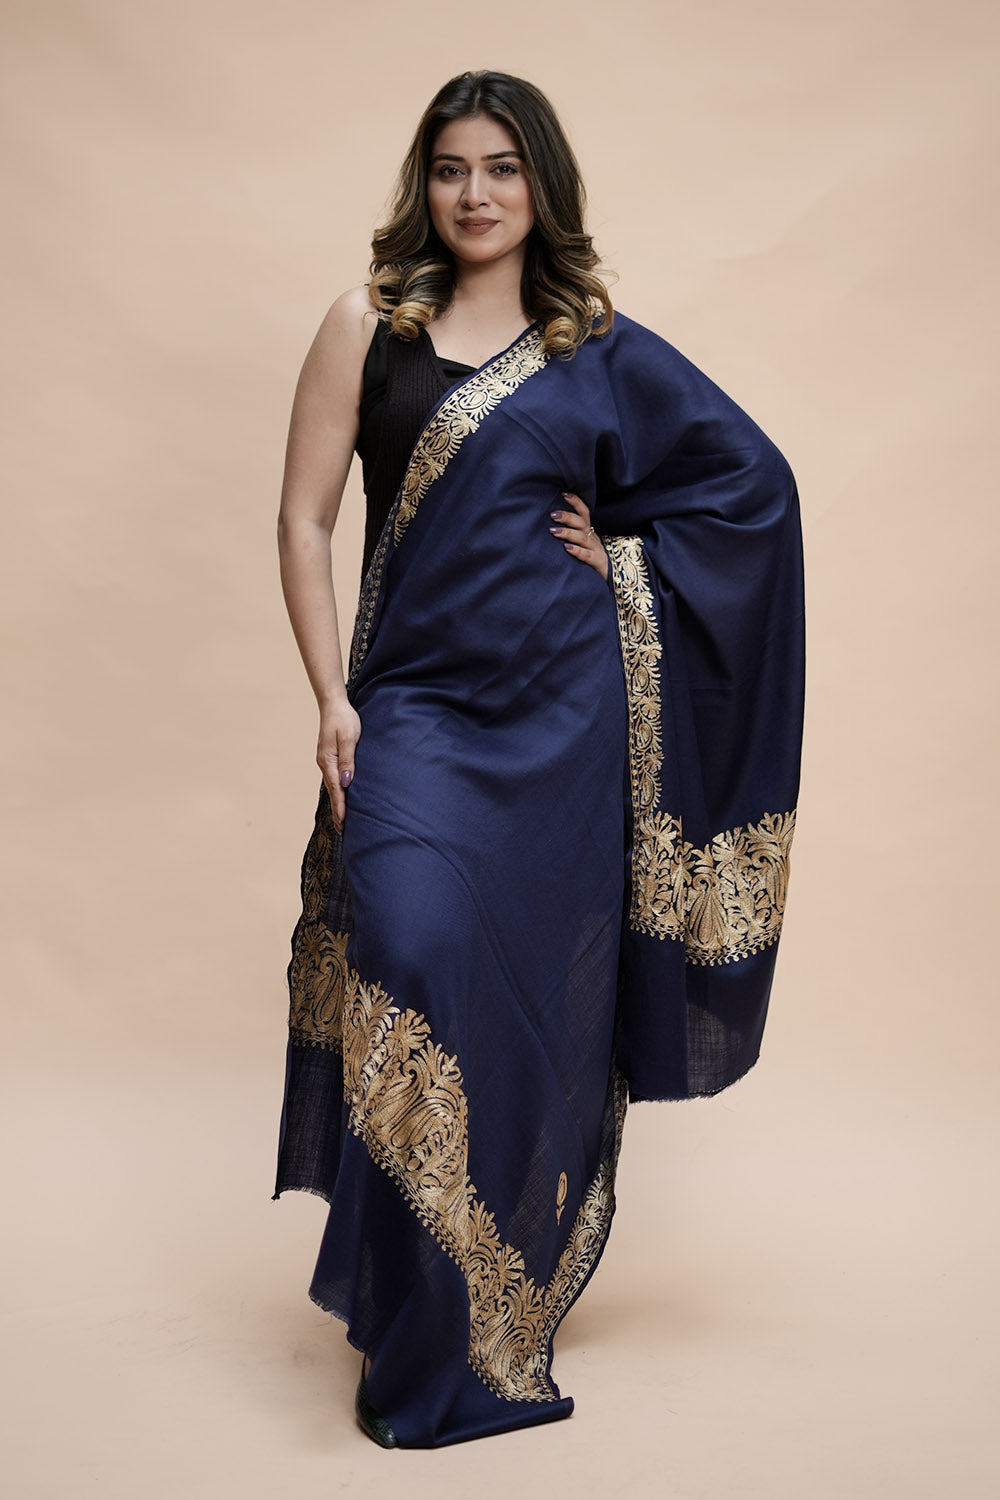 Blue Colour Semi Pashmina Shawl Enriched With Ethnic Heavy